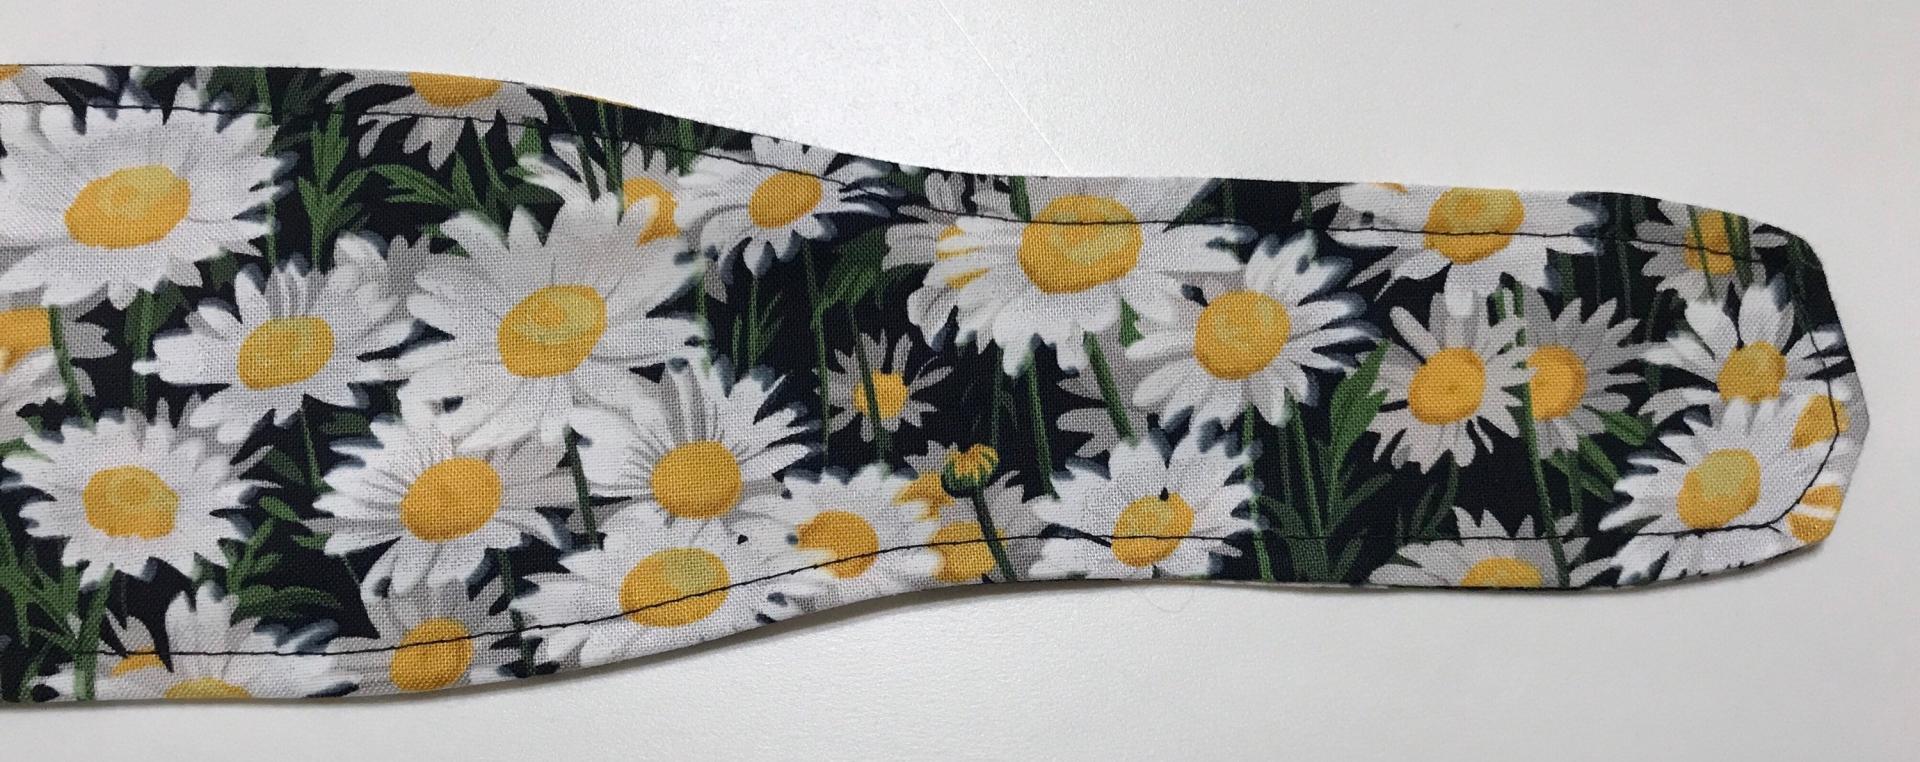 3” Wide Daisies Floral headband, self tie, hair wrap, pin up style, hair tie, retro style, rockabilly